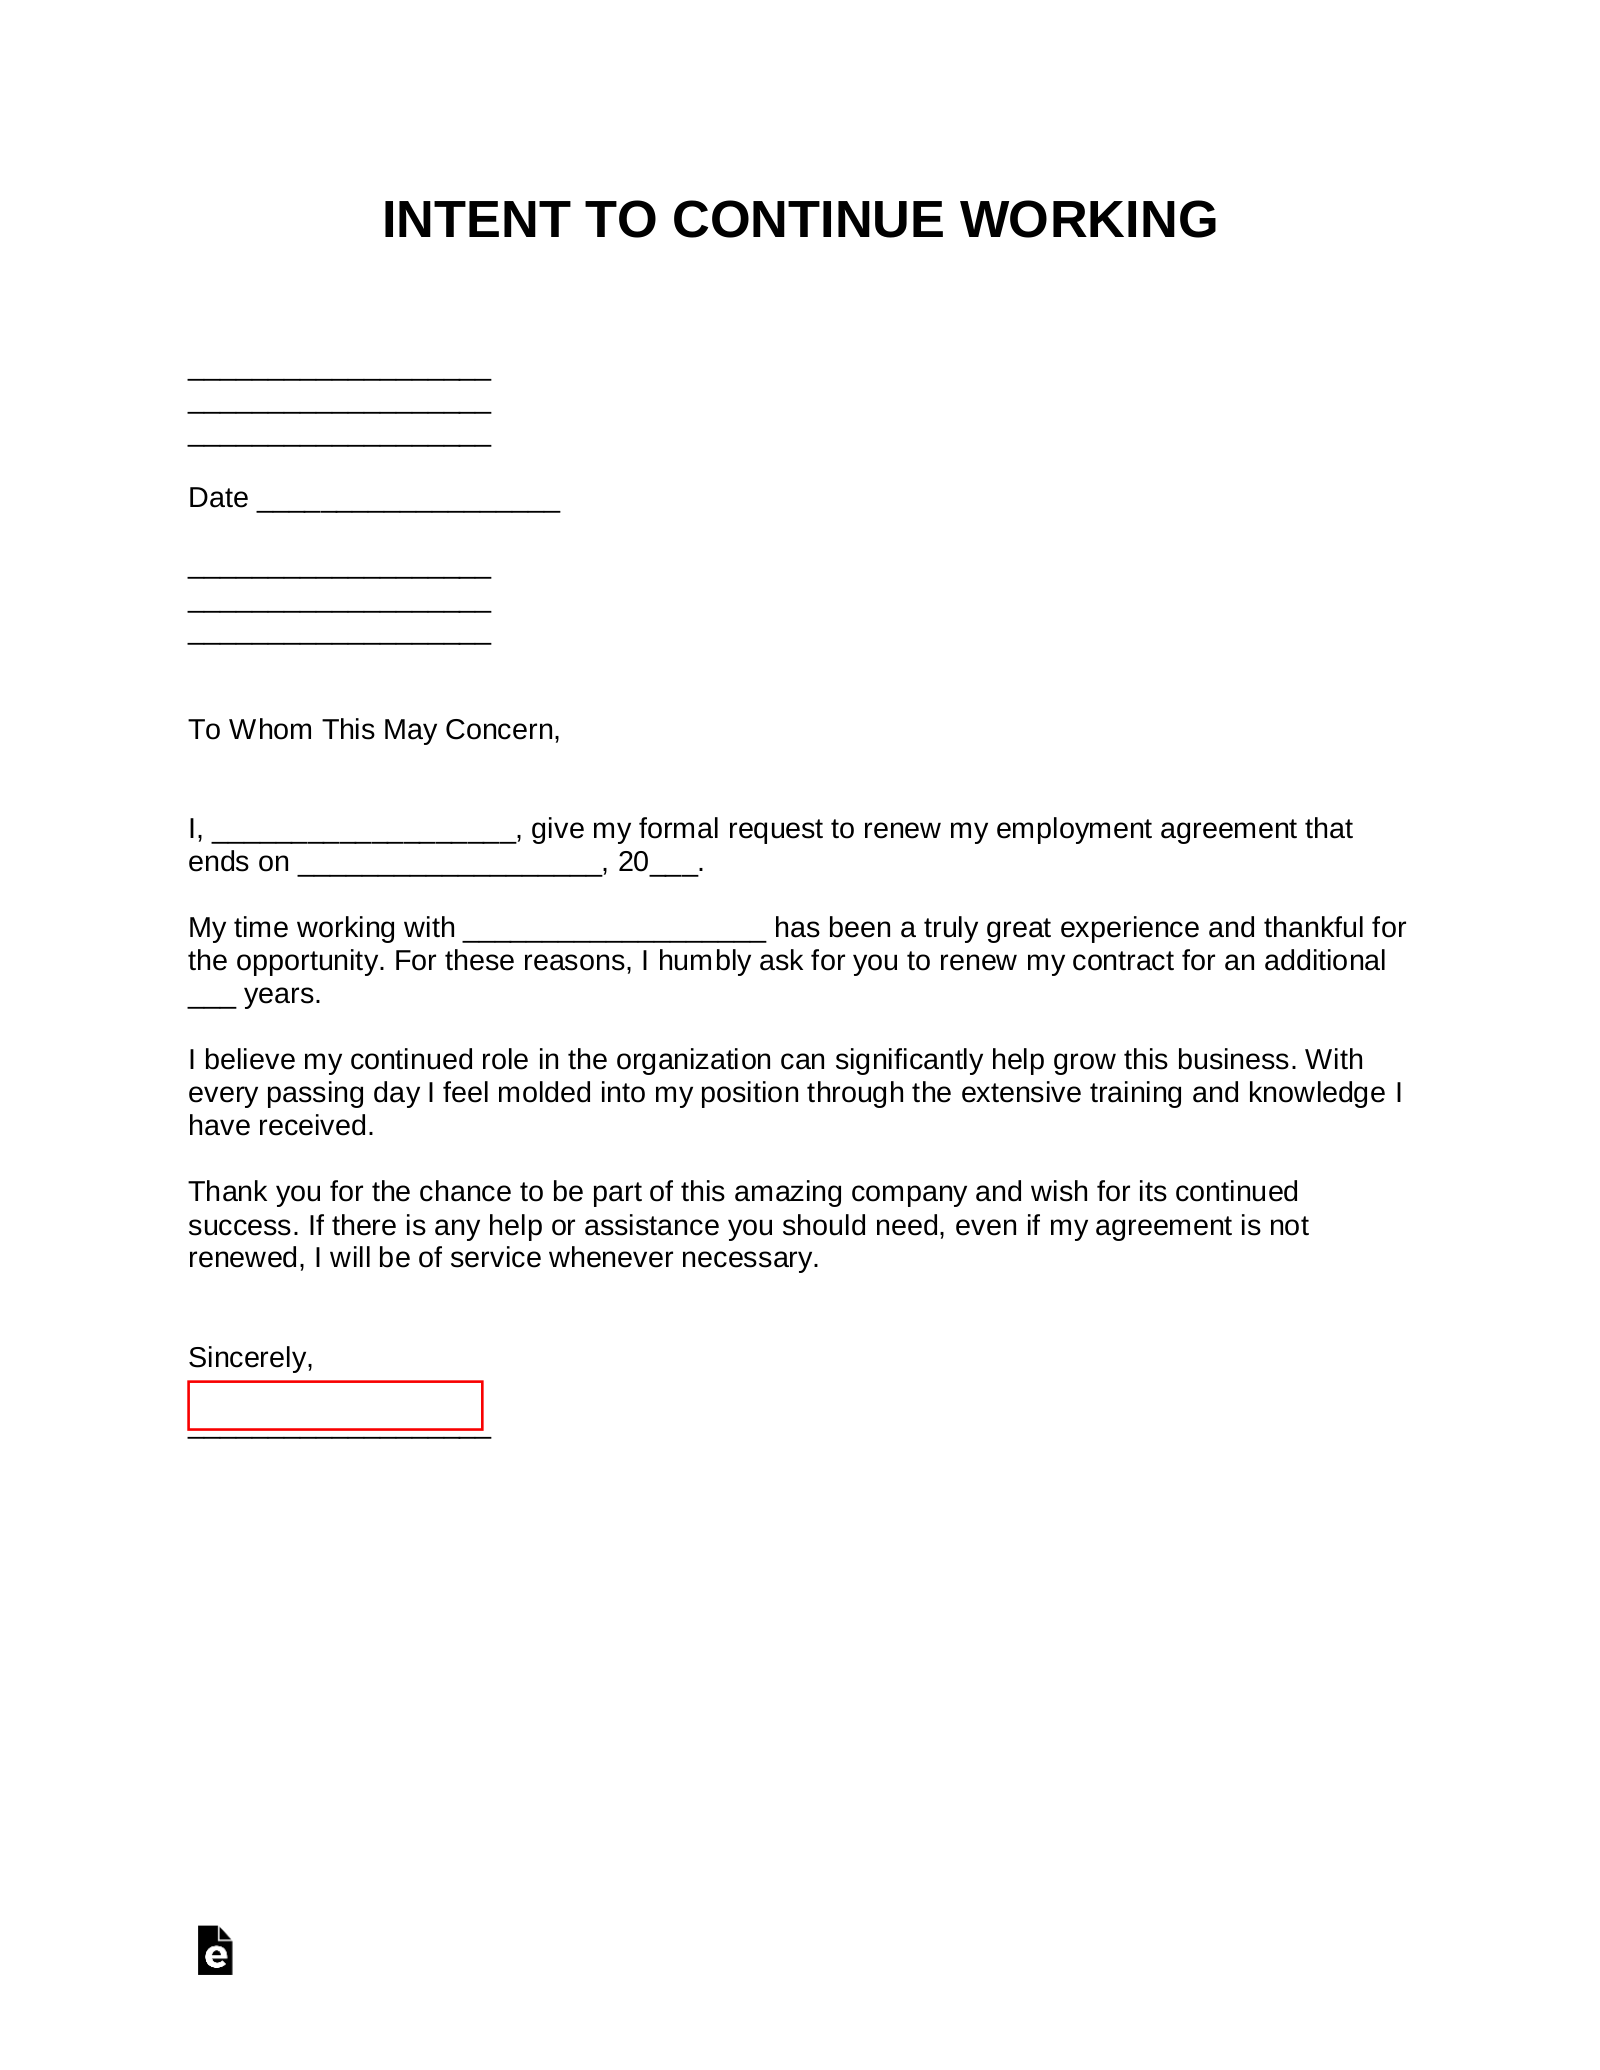 Letter Of Intent Sample Jobs from eforms.com